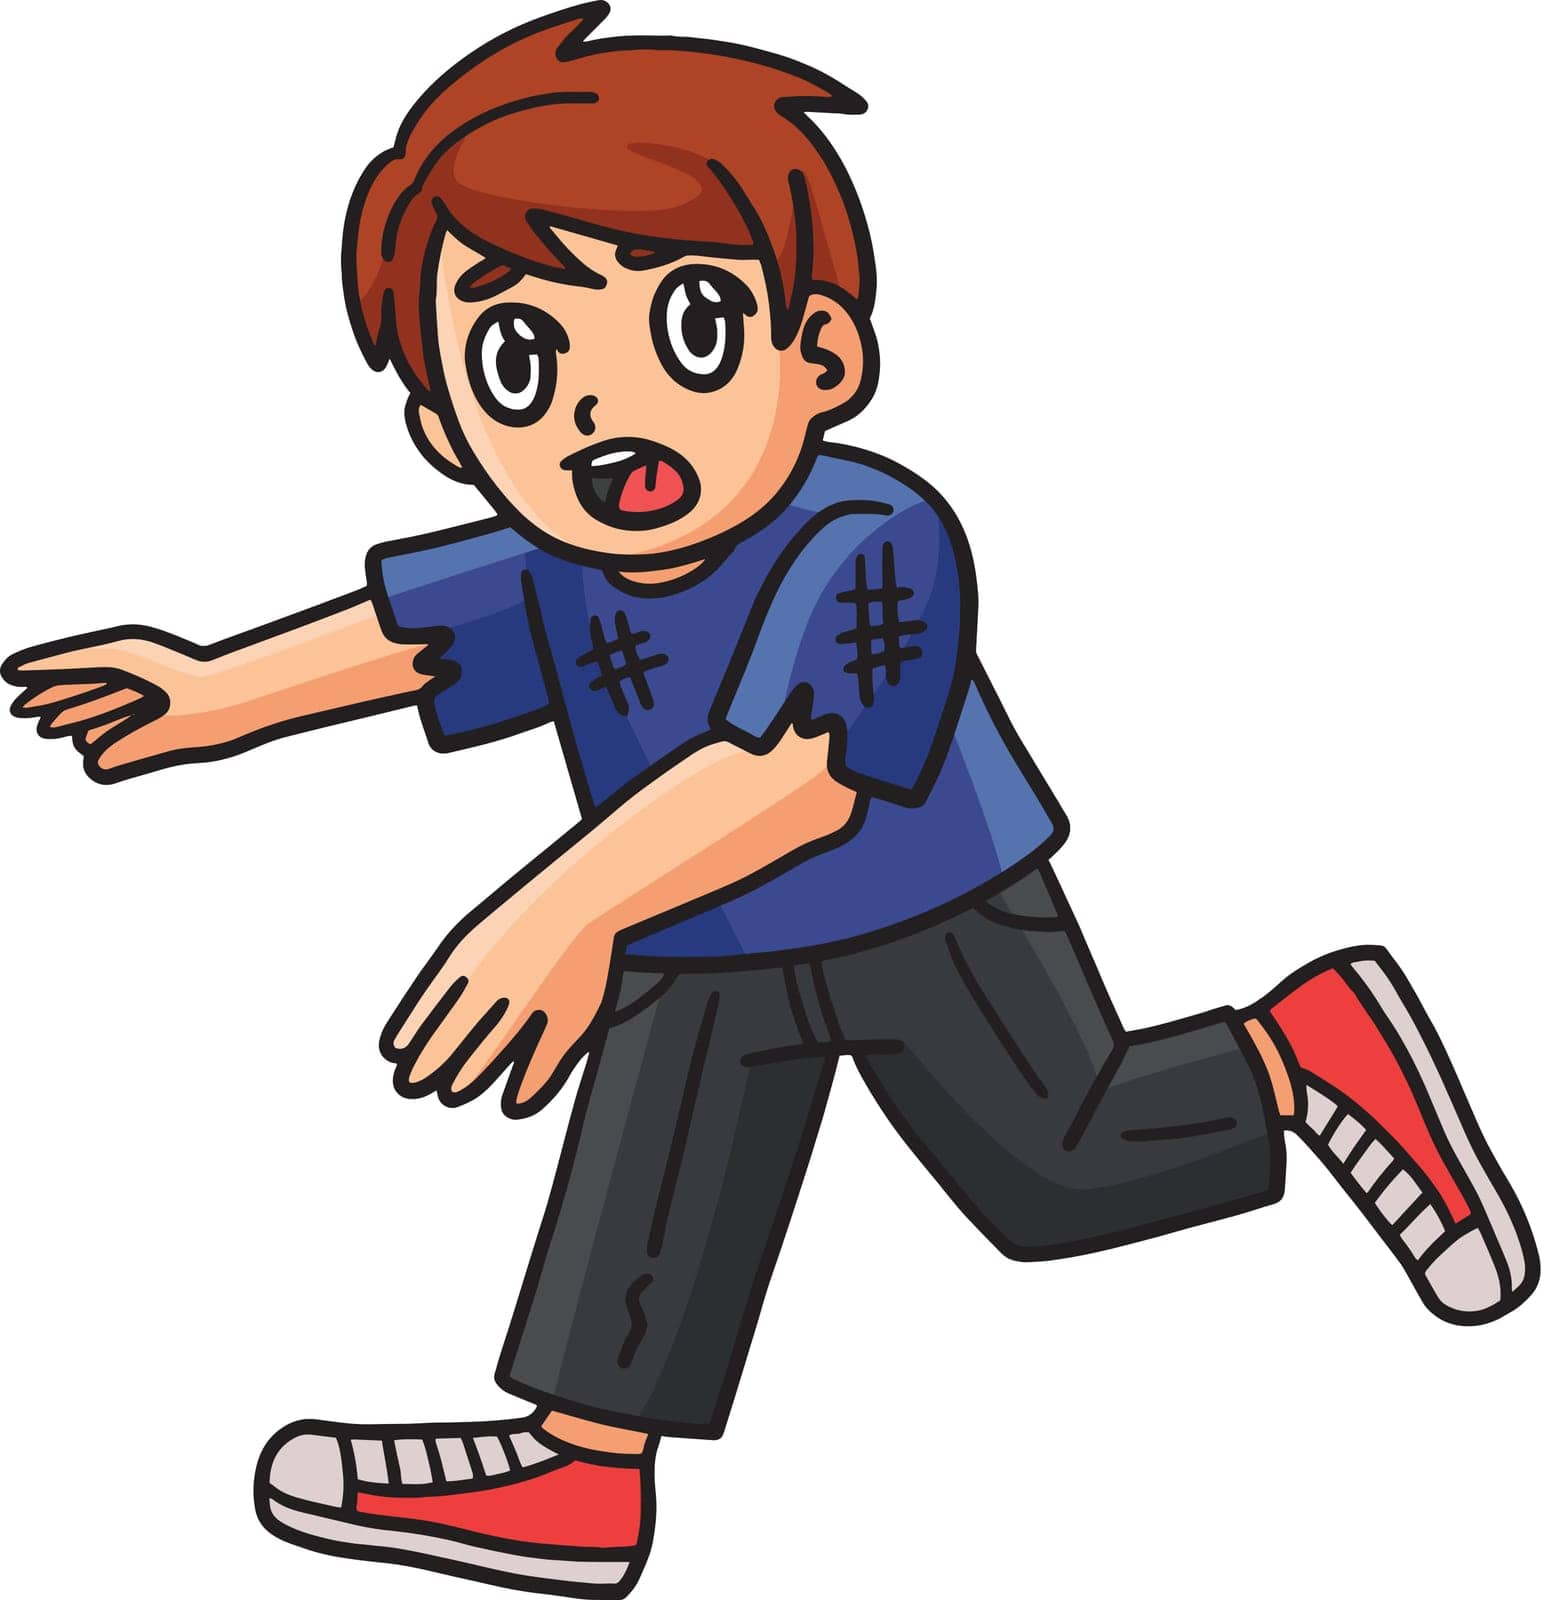 Child Running Cartoon Colored Clipart Illustration by abbydesign